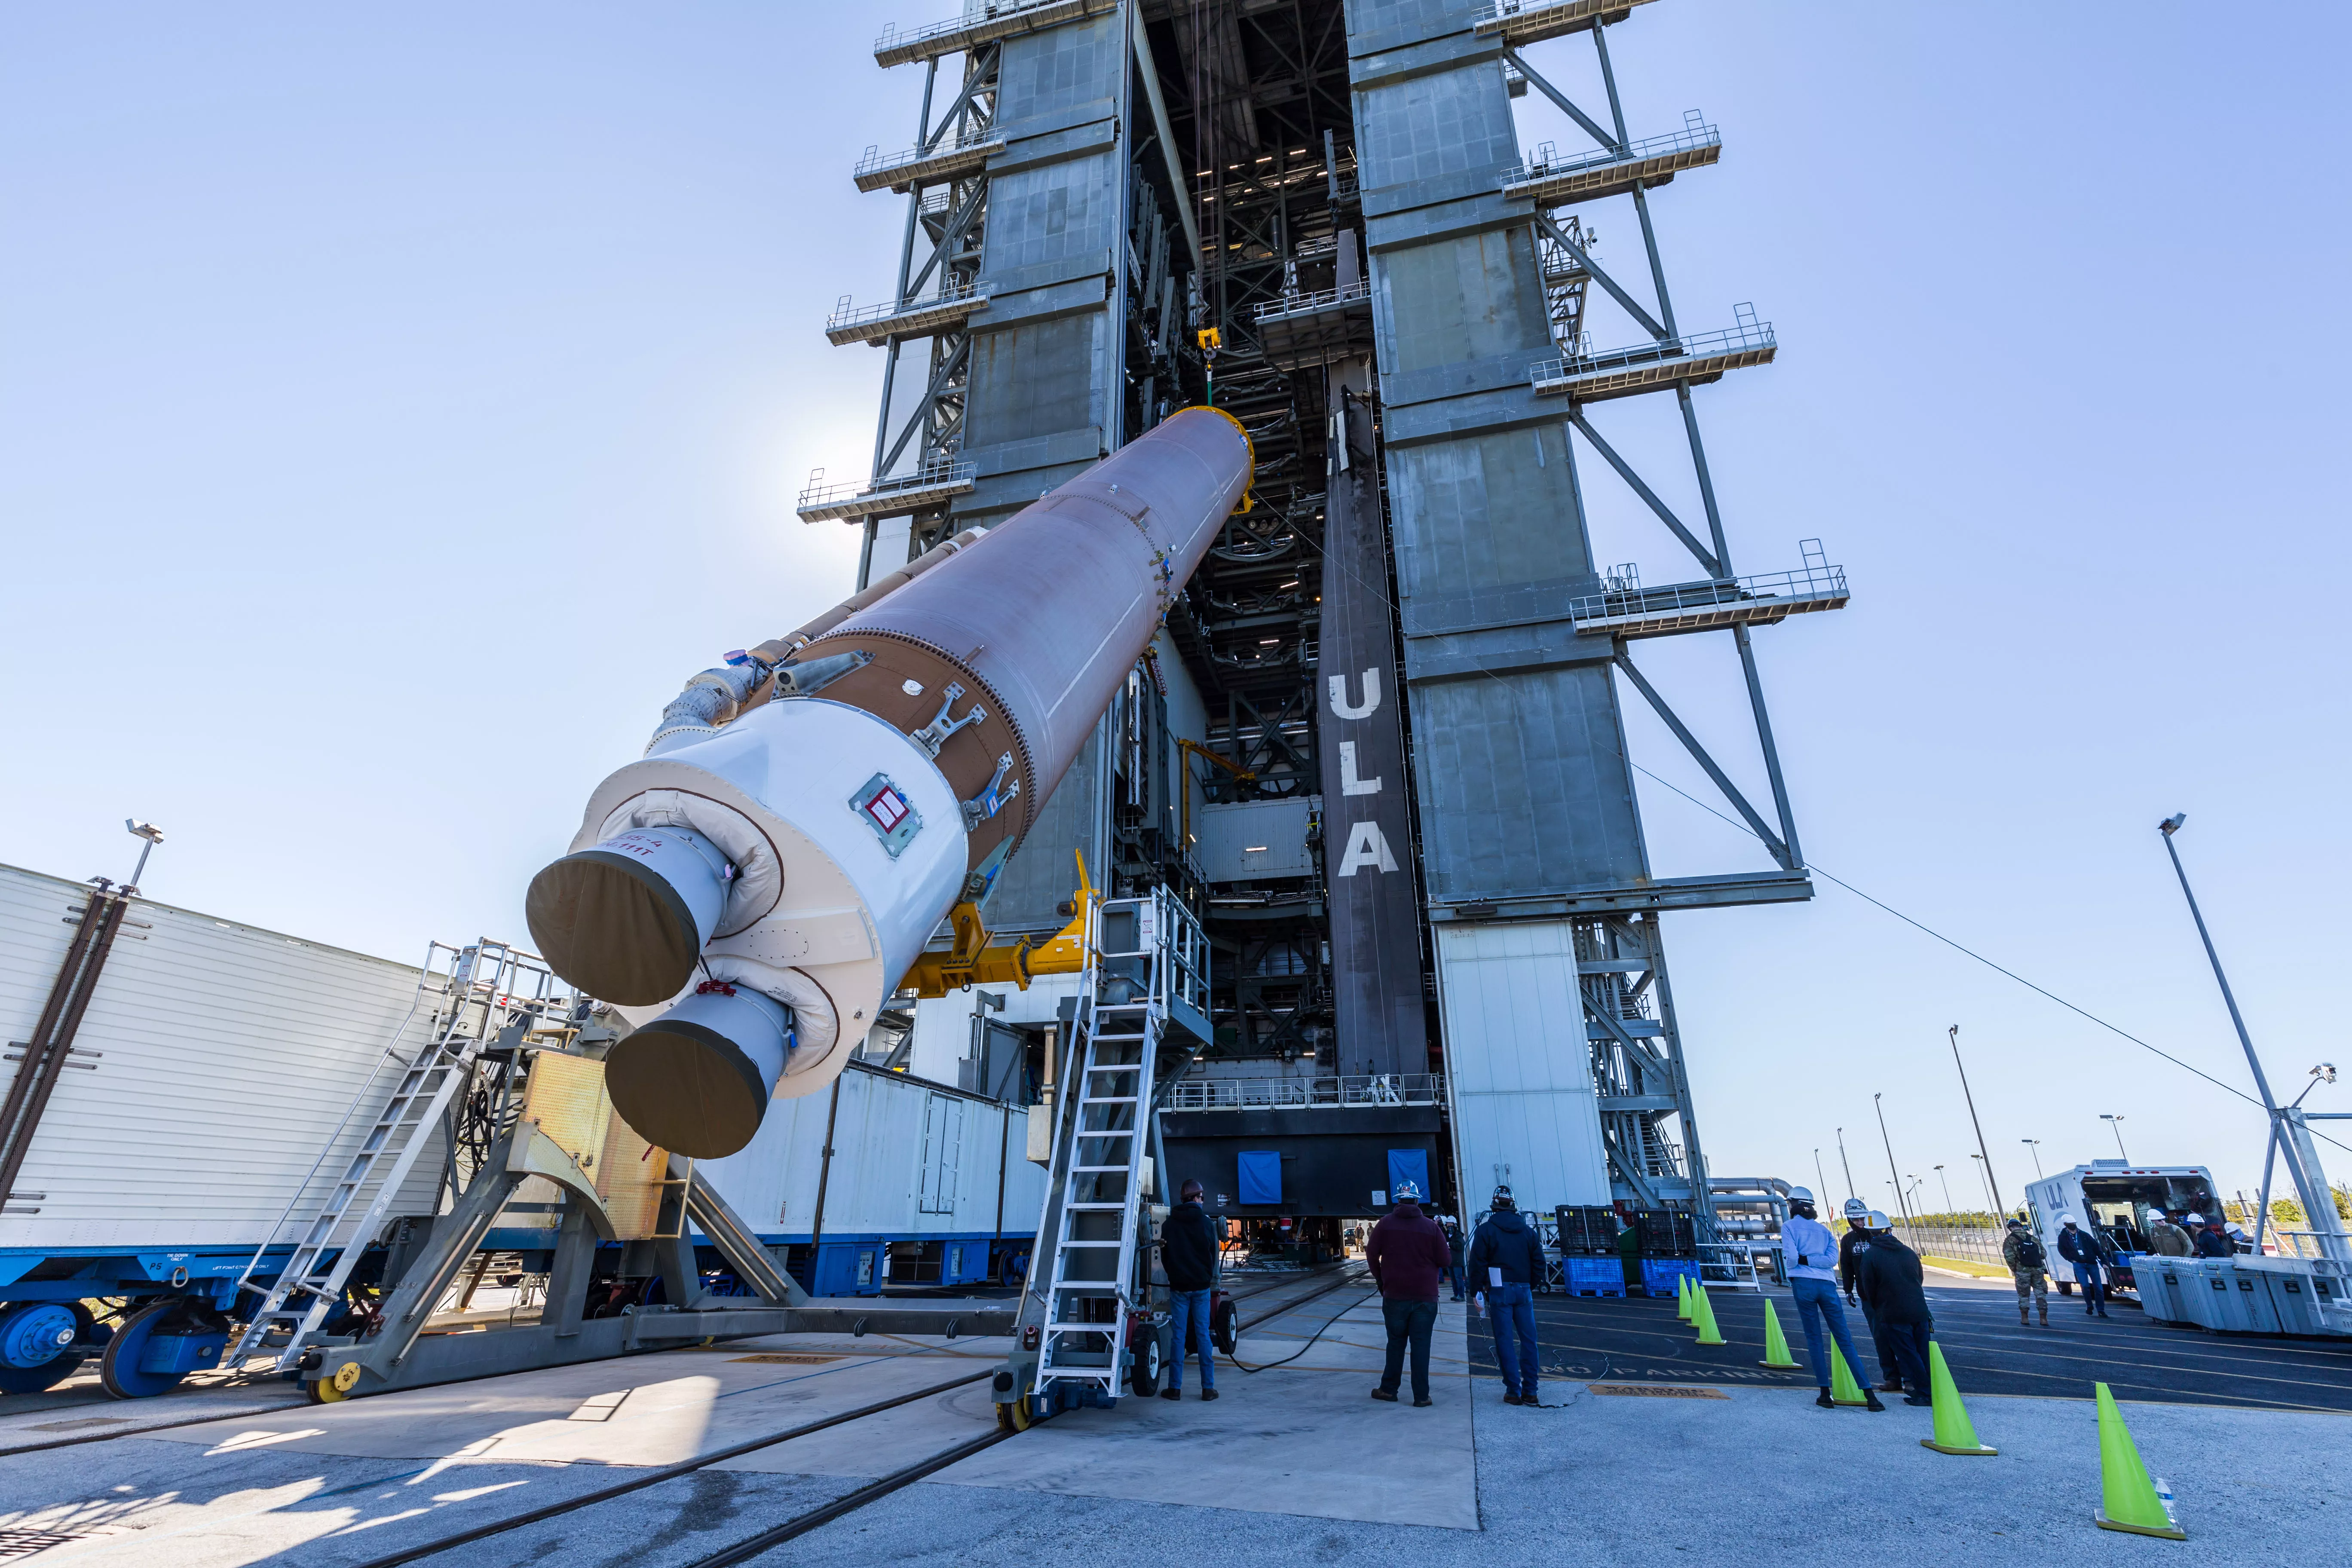 GOES-T Launch Vehicle Lifted to Stand